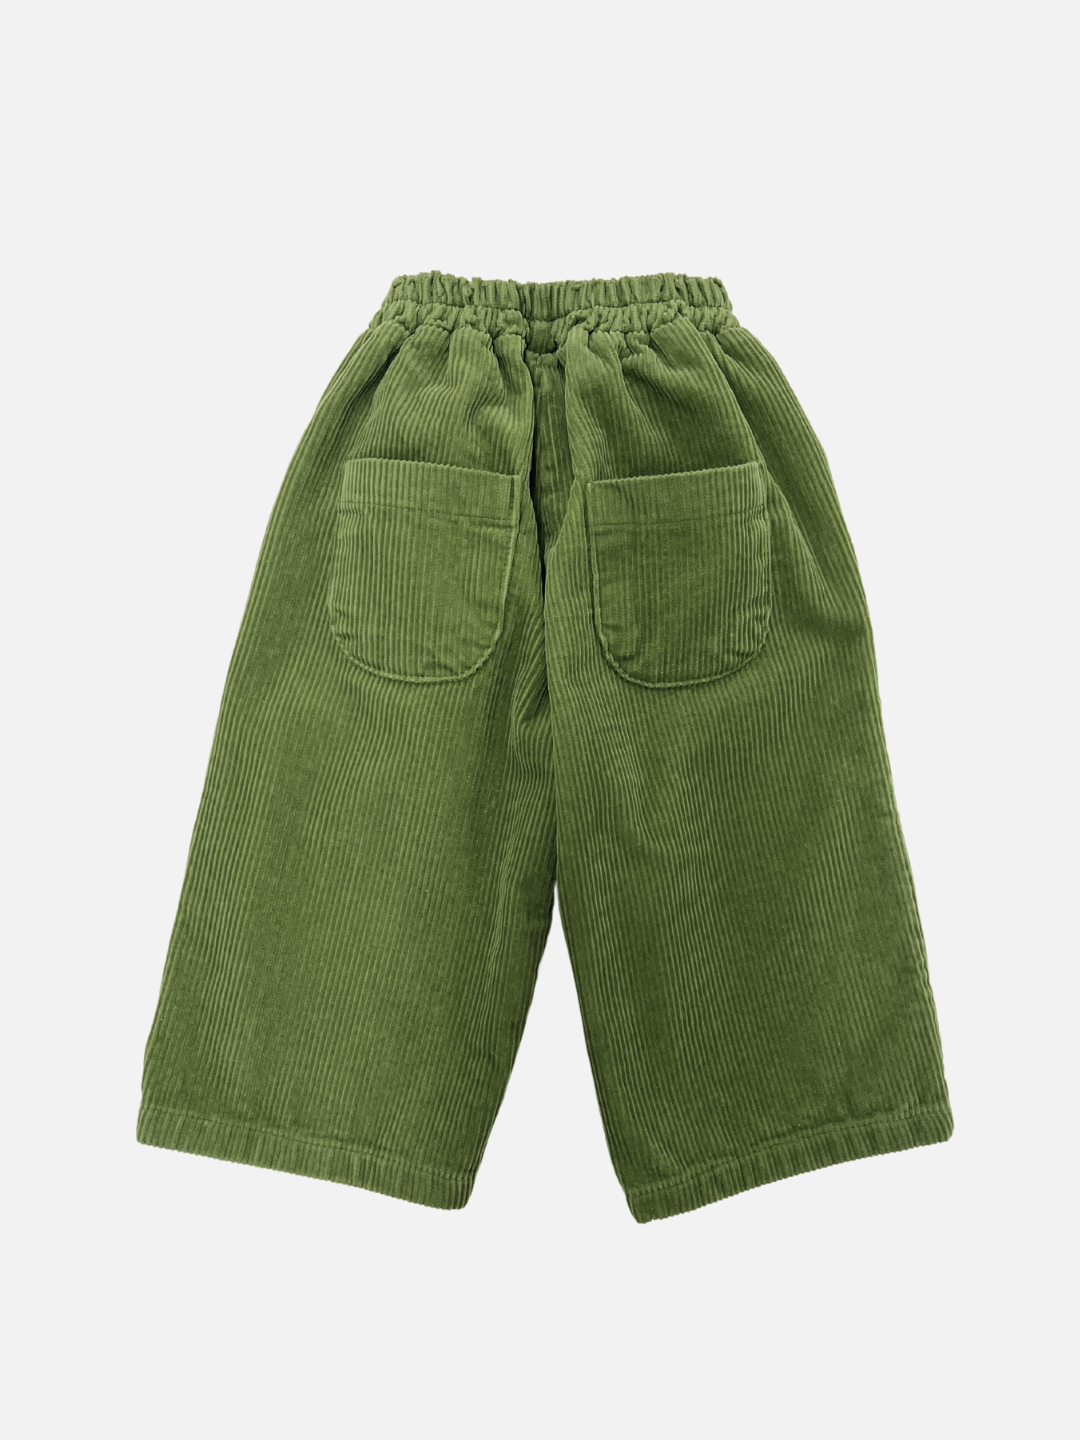 Moss | Back view of kids wide-leg corduroy pants in moss green, showing two rounded back pockets.